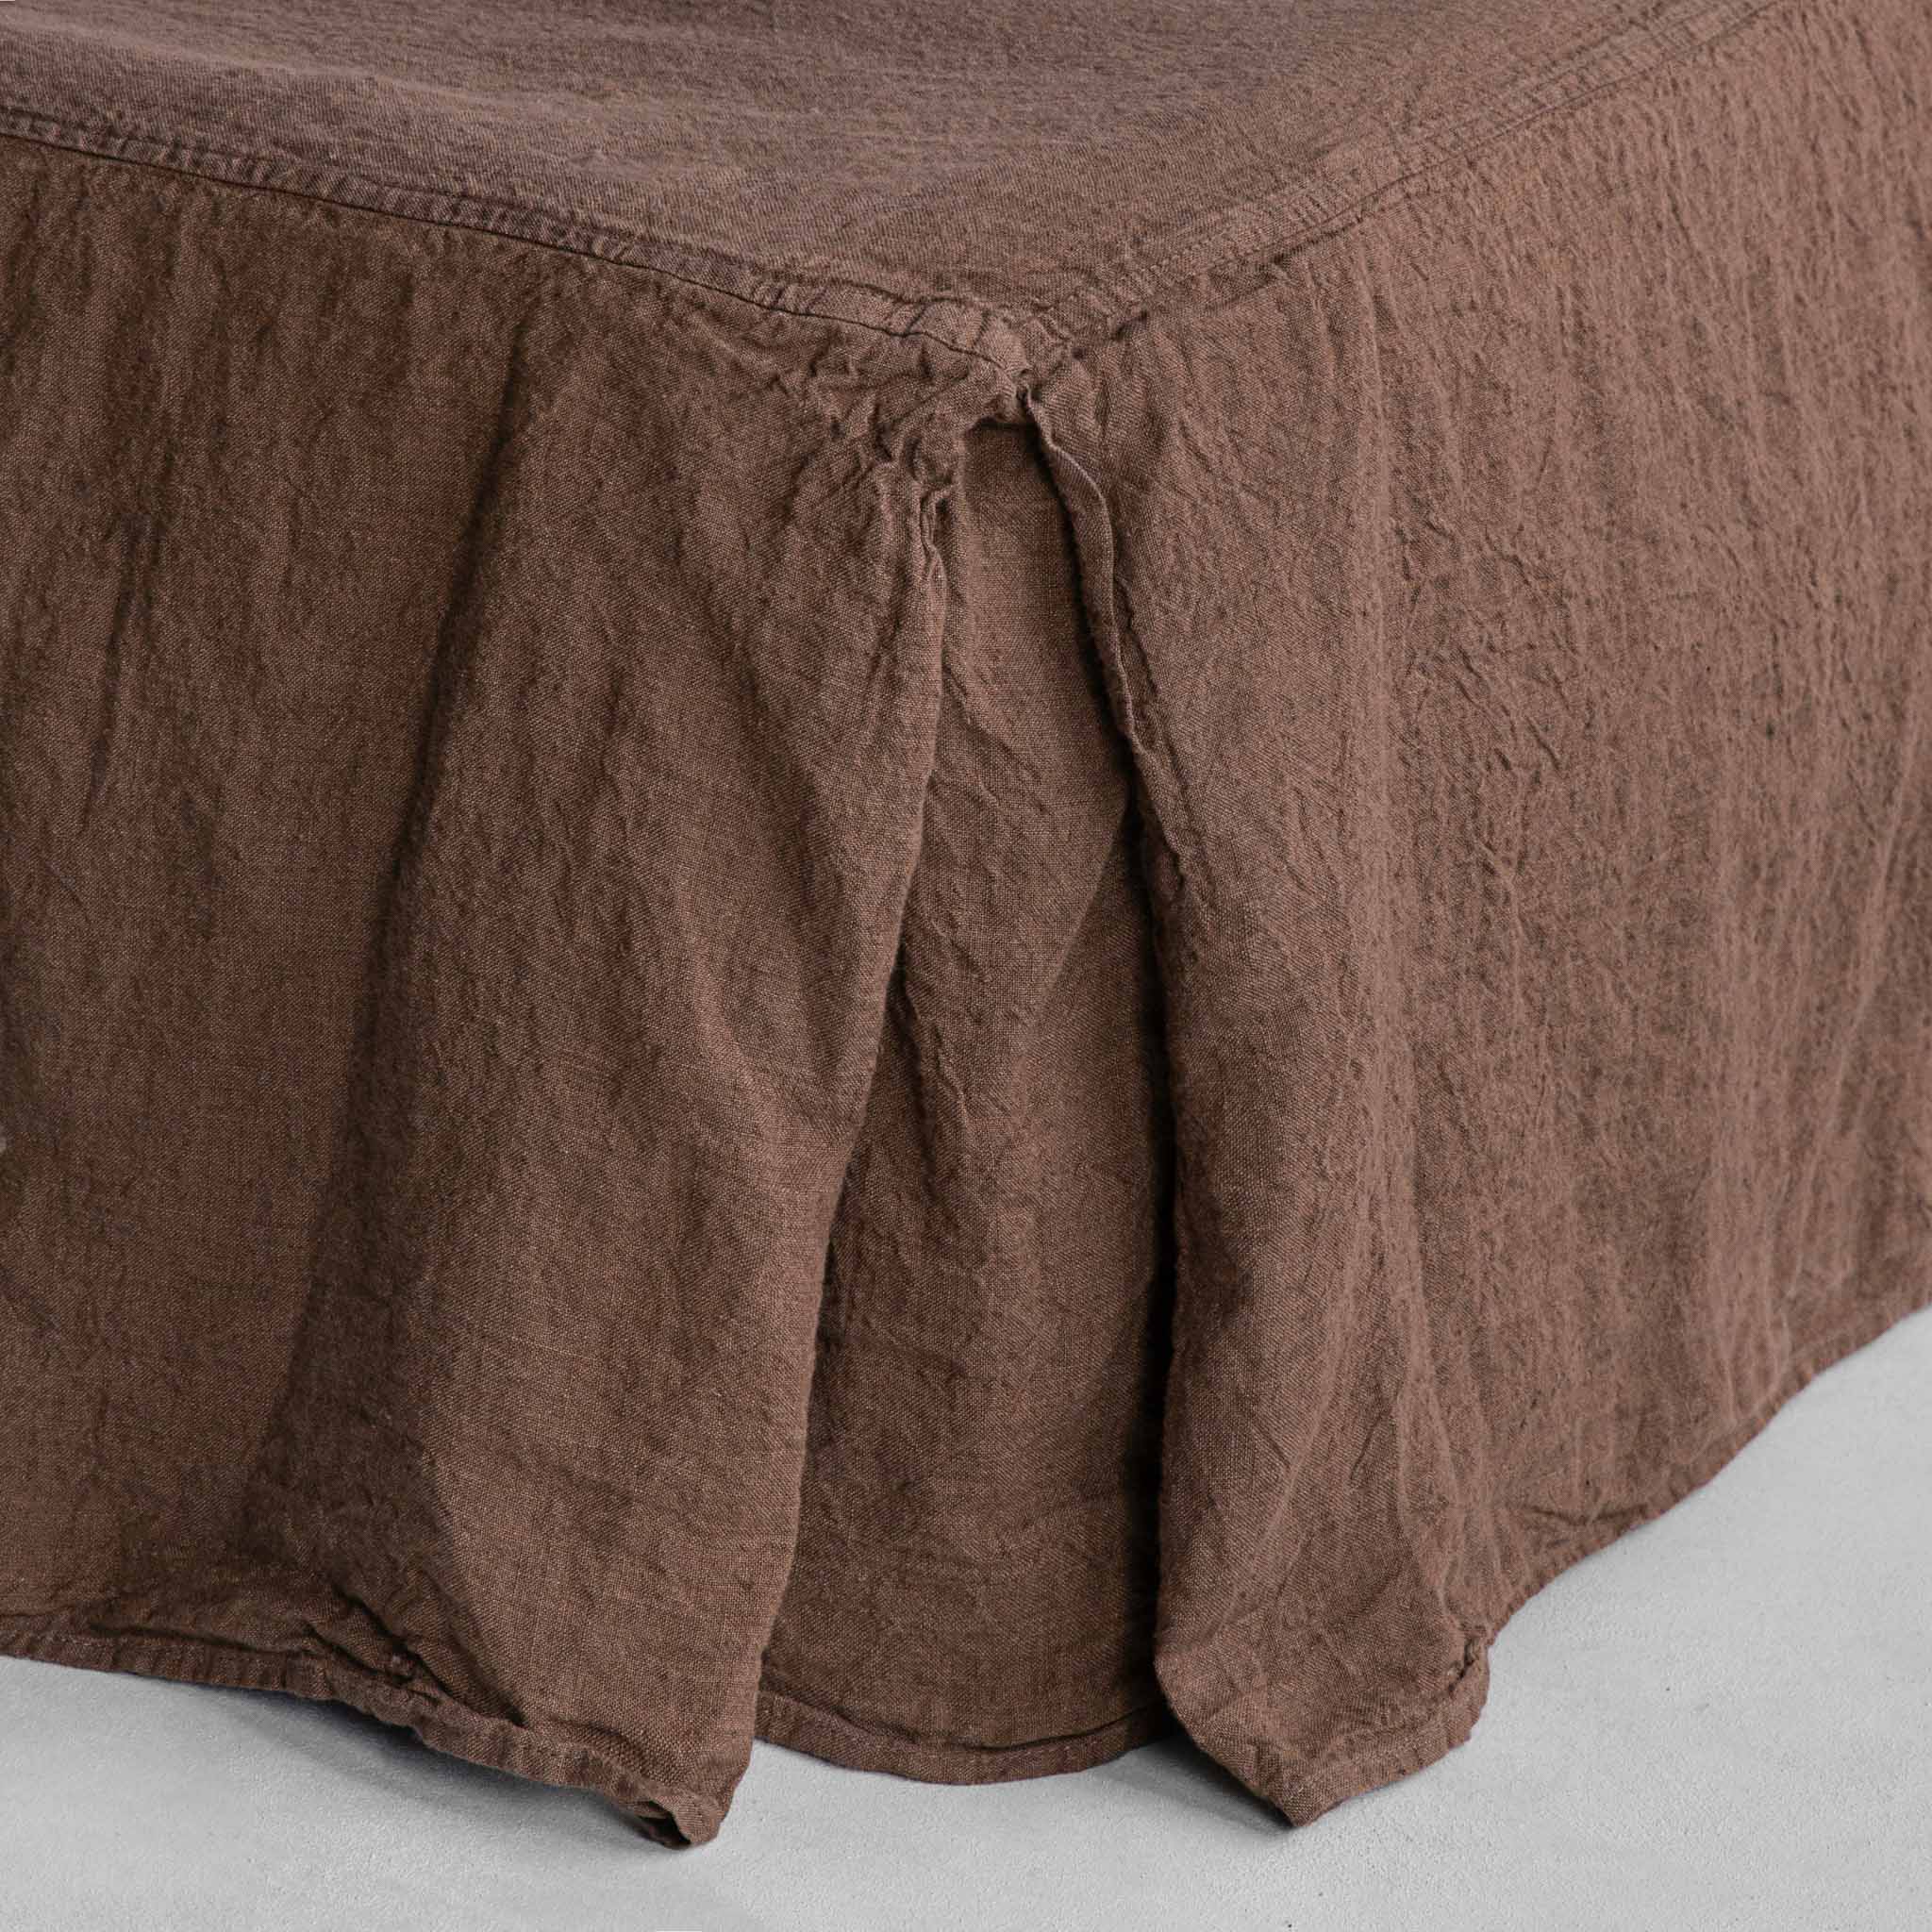 Linen Valance/Bed Skirt | Chocolate Brown | Hale Mercantile Co.